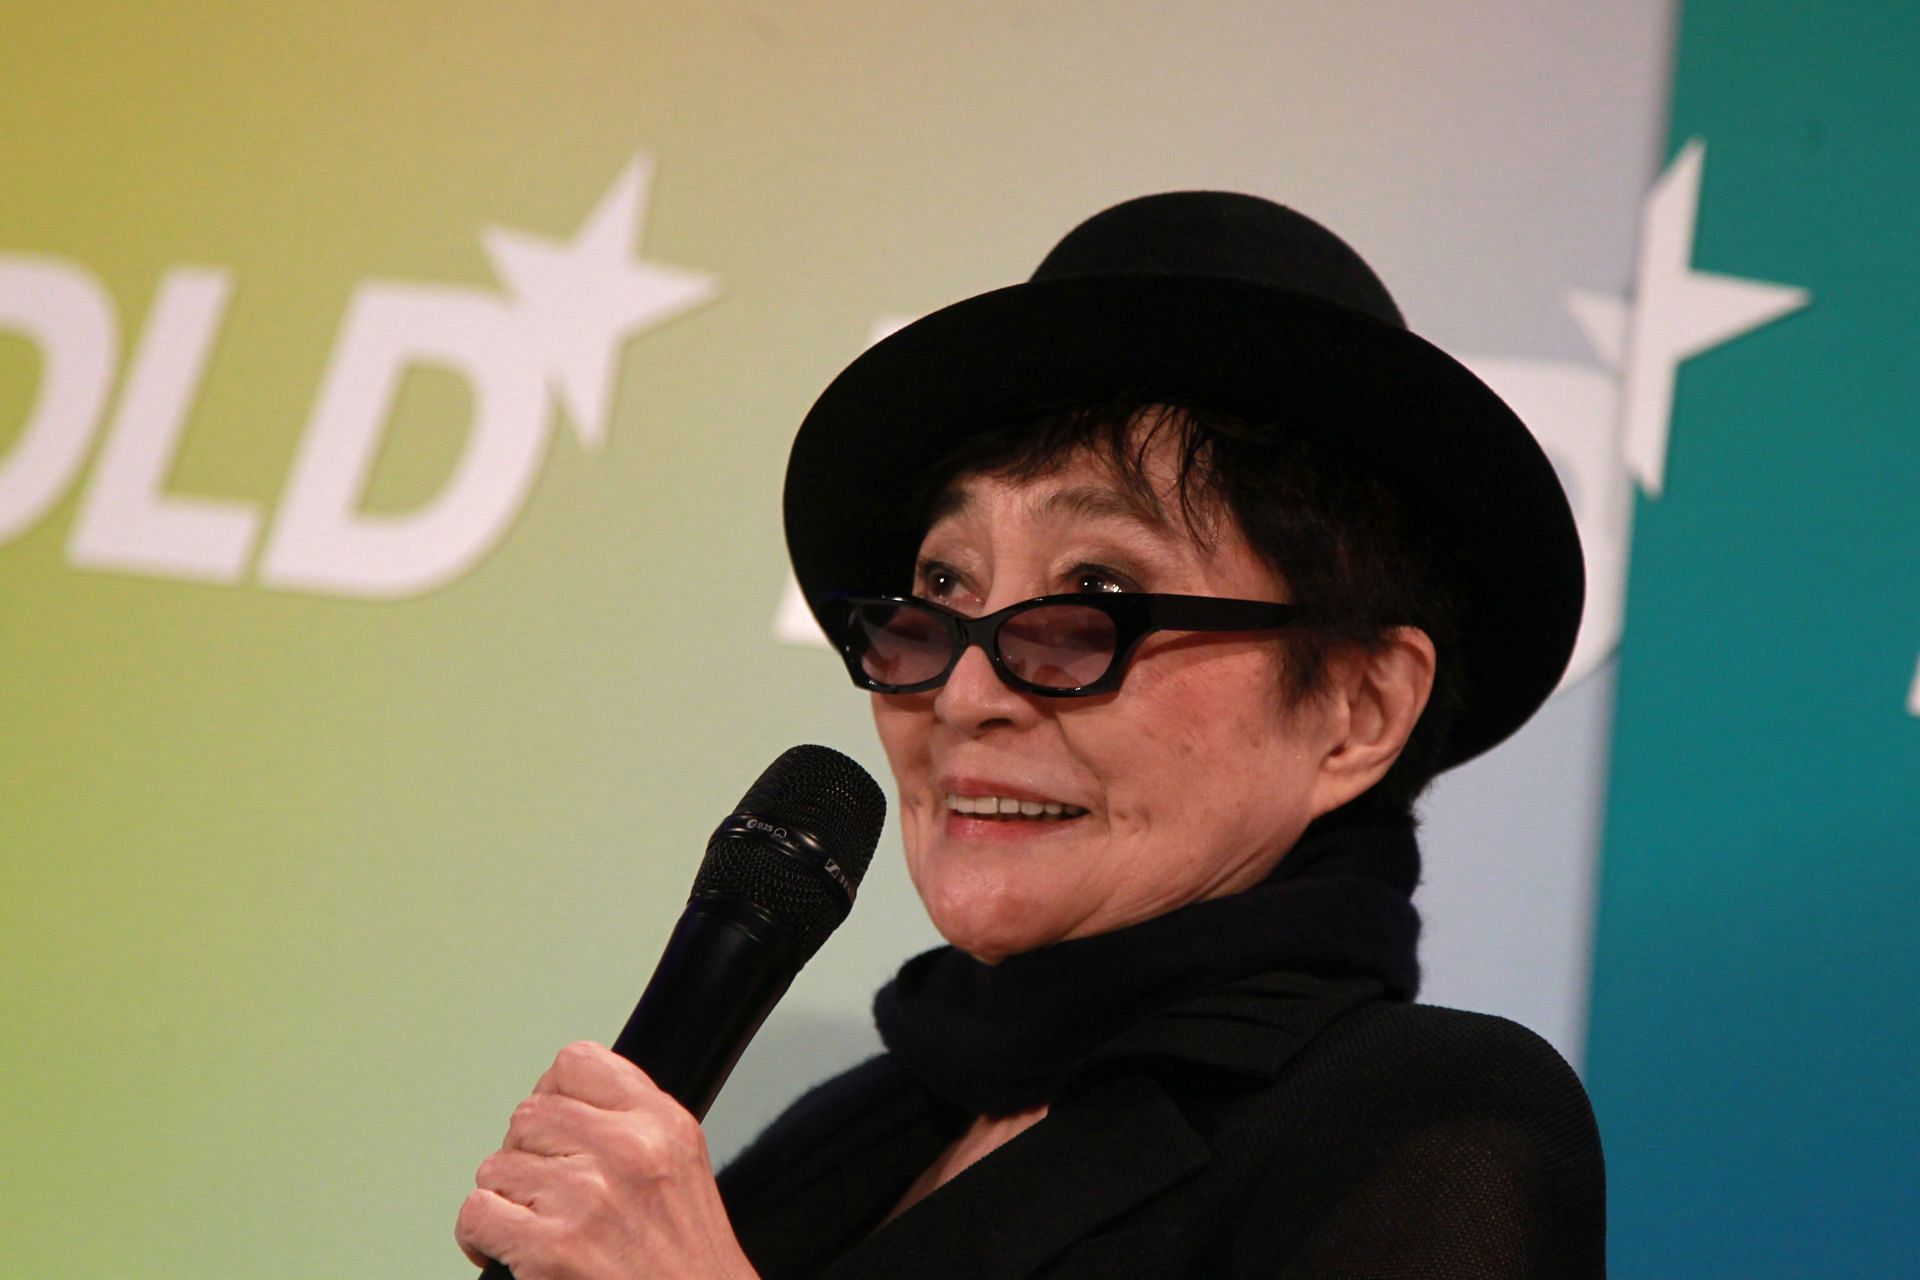 Artist Yoko Ono at the DLD Conference. (Photo by Johannes Simon/Getty Images)